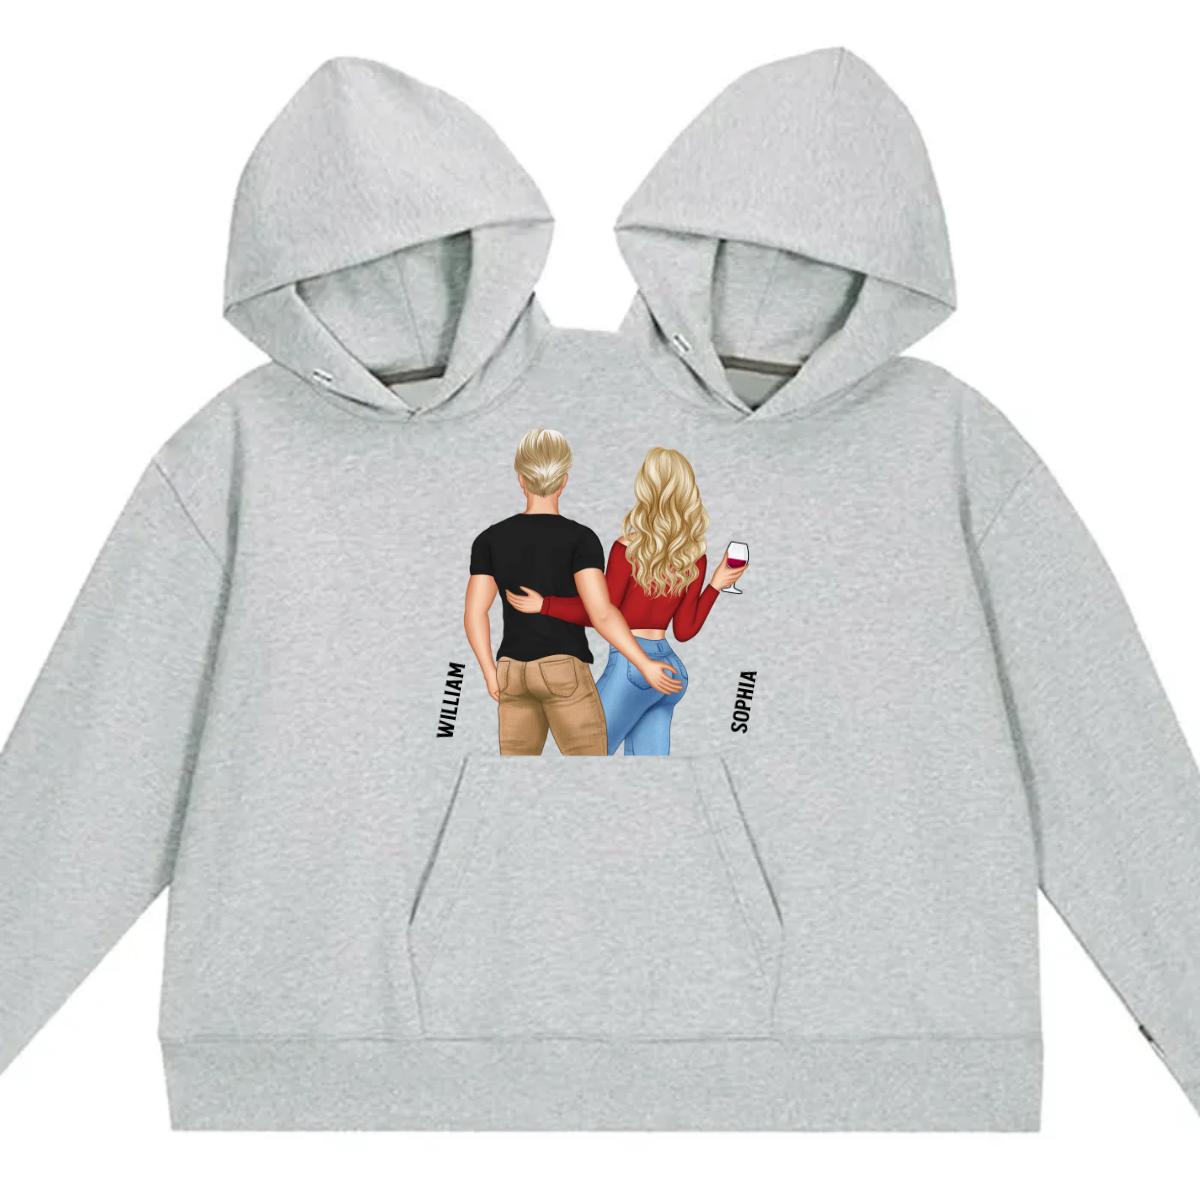 Gift For Couples - Personalized Couple One-piece Hoodie